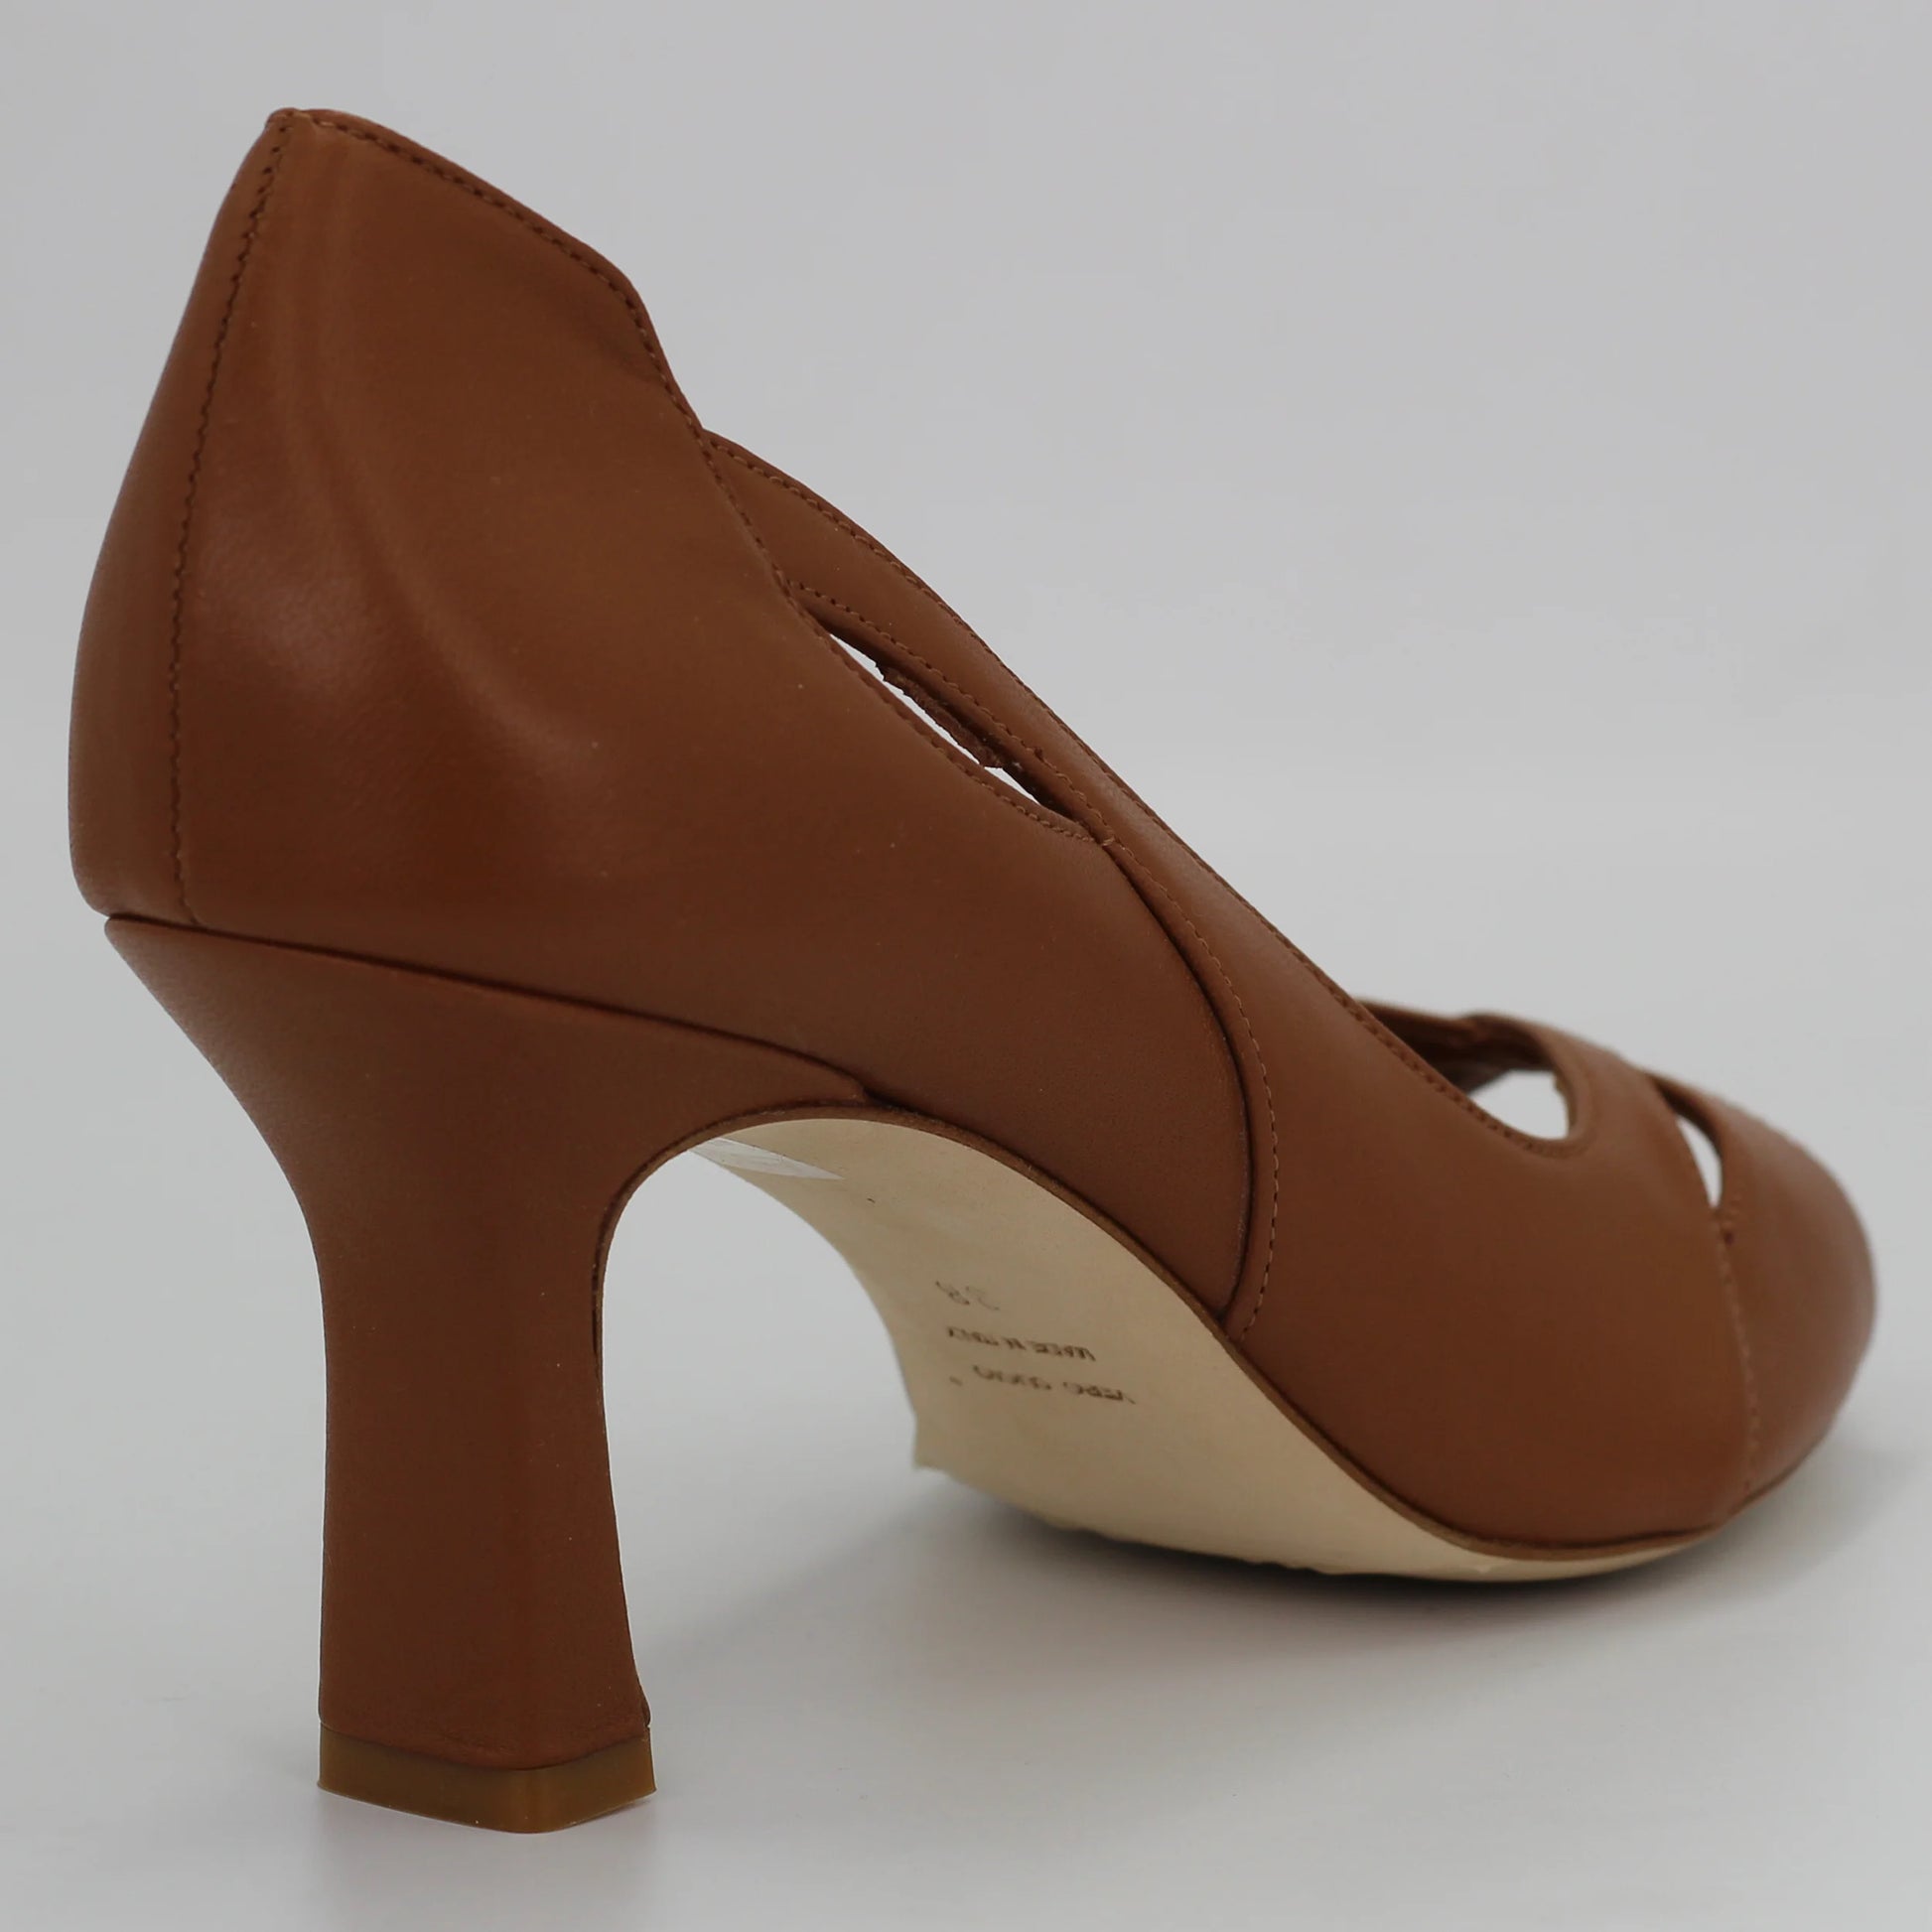 Shop Handmade Italian Leather open toe heel in tan (MA9605/P) or browse our range of hand-made Italian shoes in leather or suede in-store at Aliverti Cape Town, or shop online. We deliver in South Africa & offer multiple payment plans as well as accept multiple safe & secure payment methods.